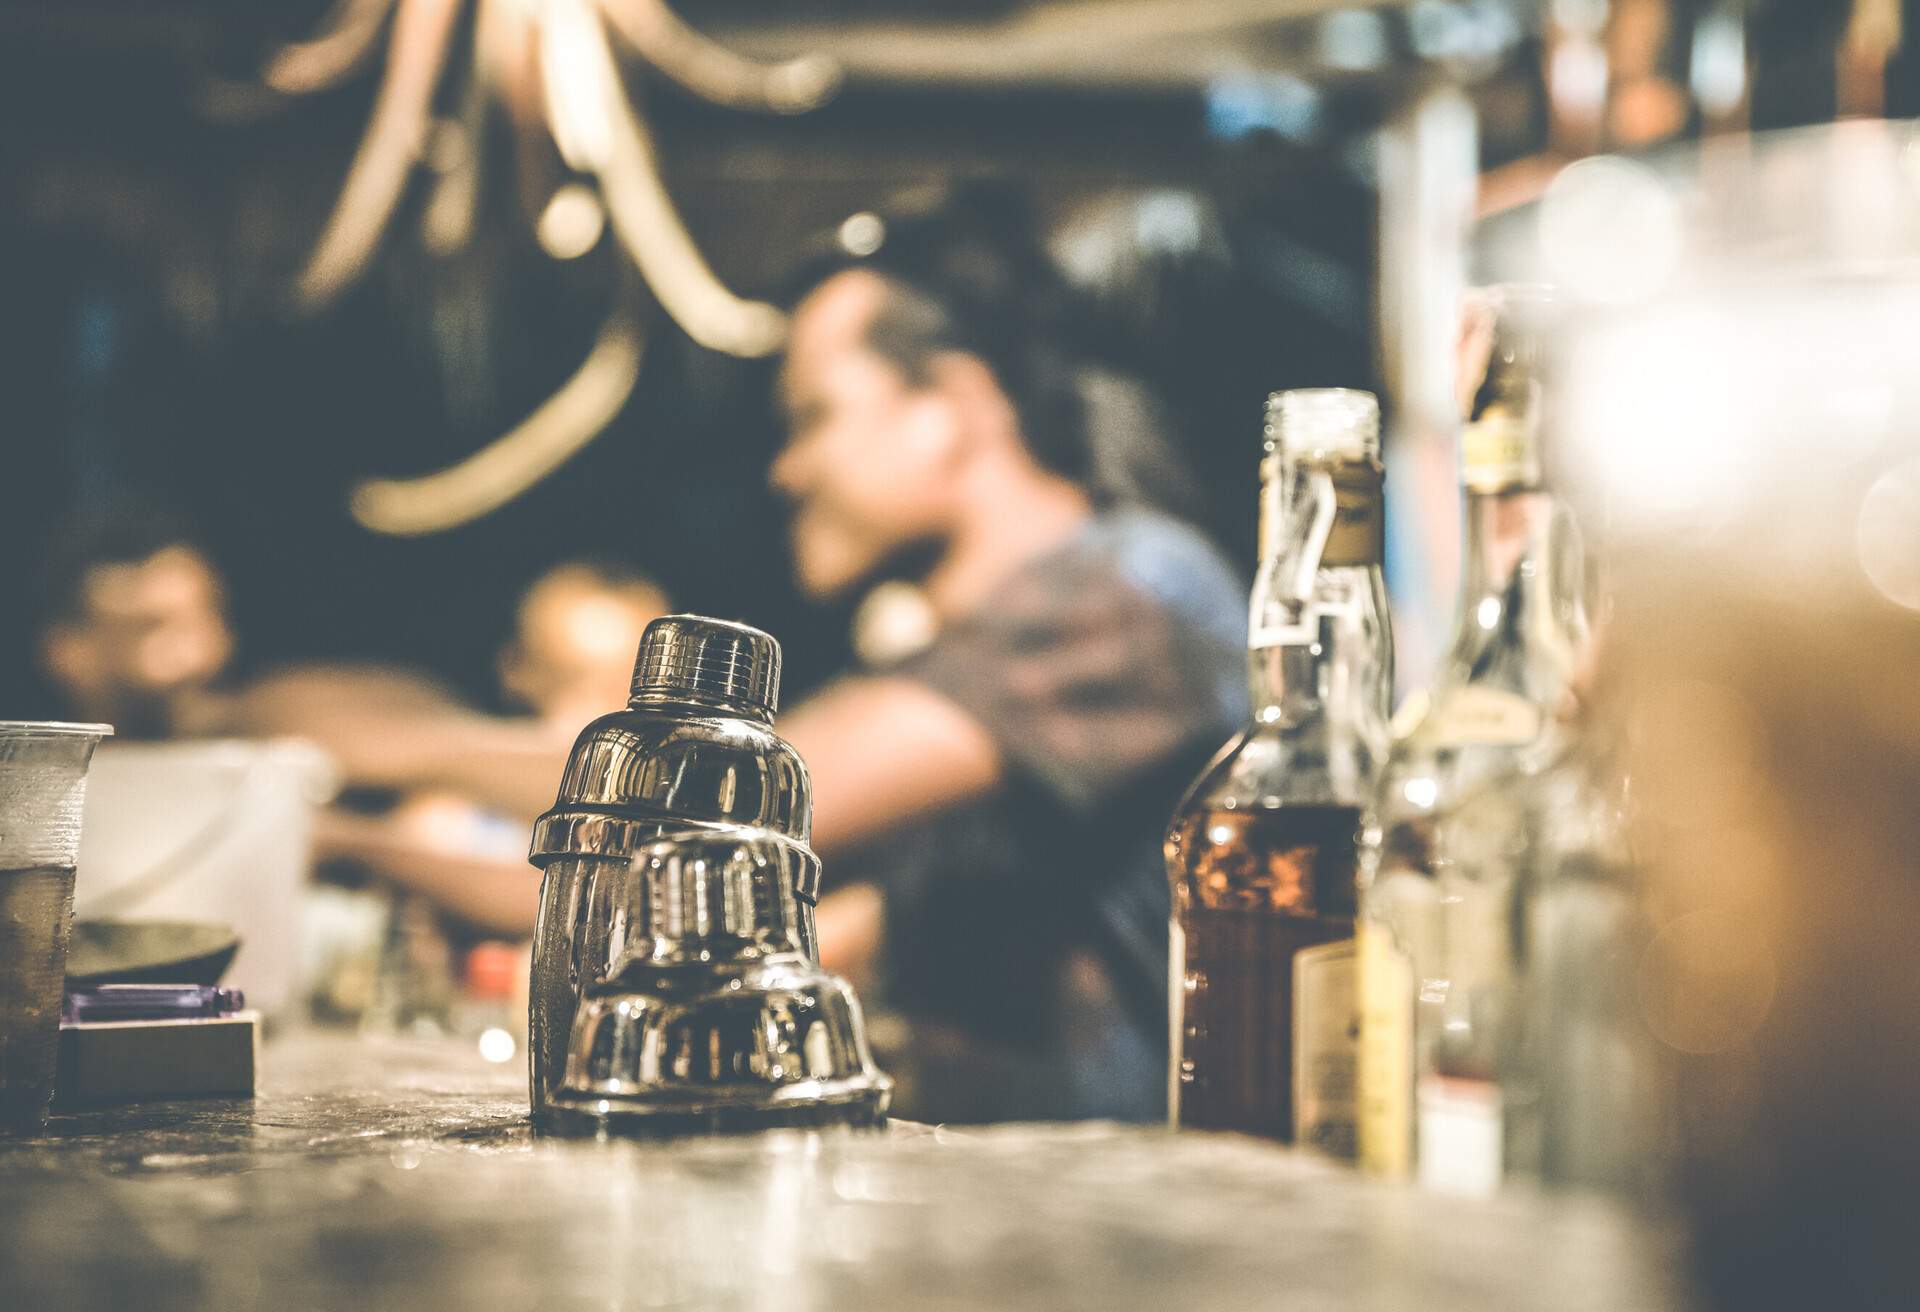 Blurred defocused side view of barman and guests drinking and having fun at cocktail bar - Social gathering concept with people enjoying time together - Warm retro contrast filter with focus on shaker; Shutterstock ID 586937294